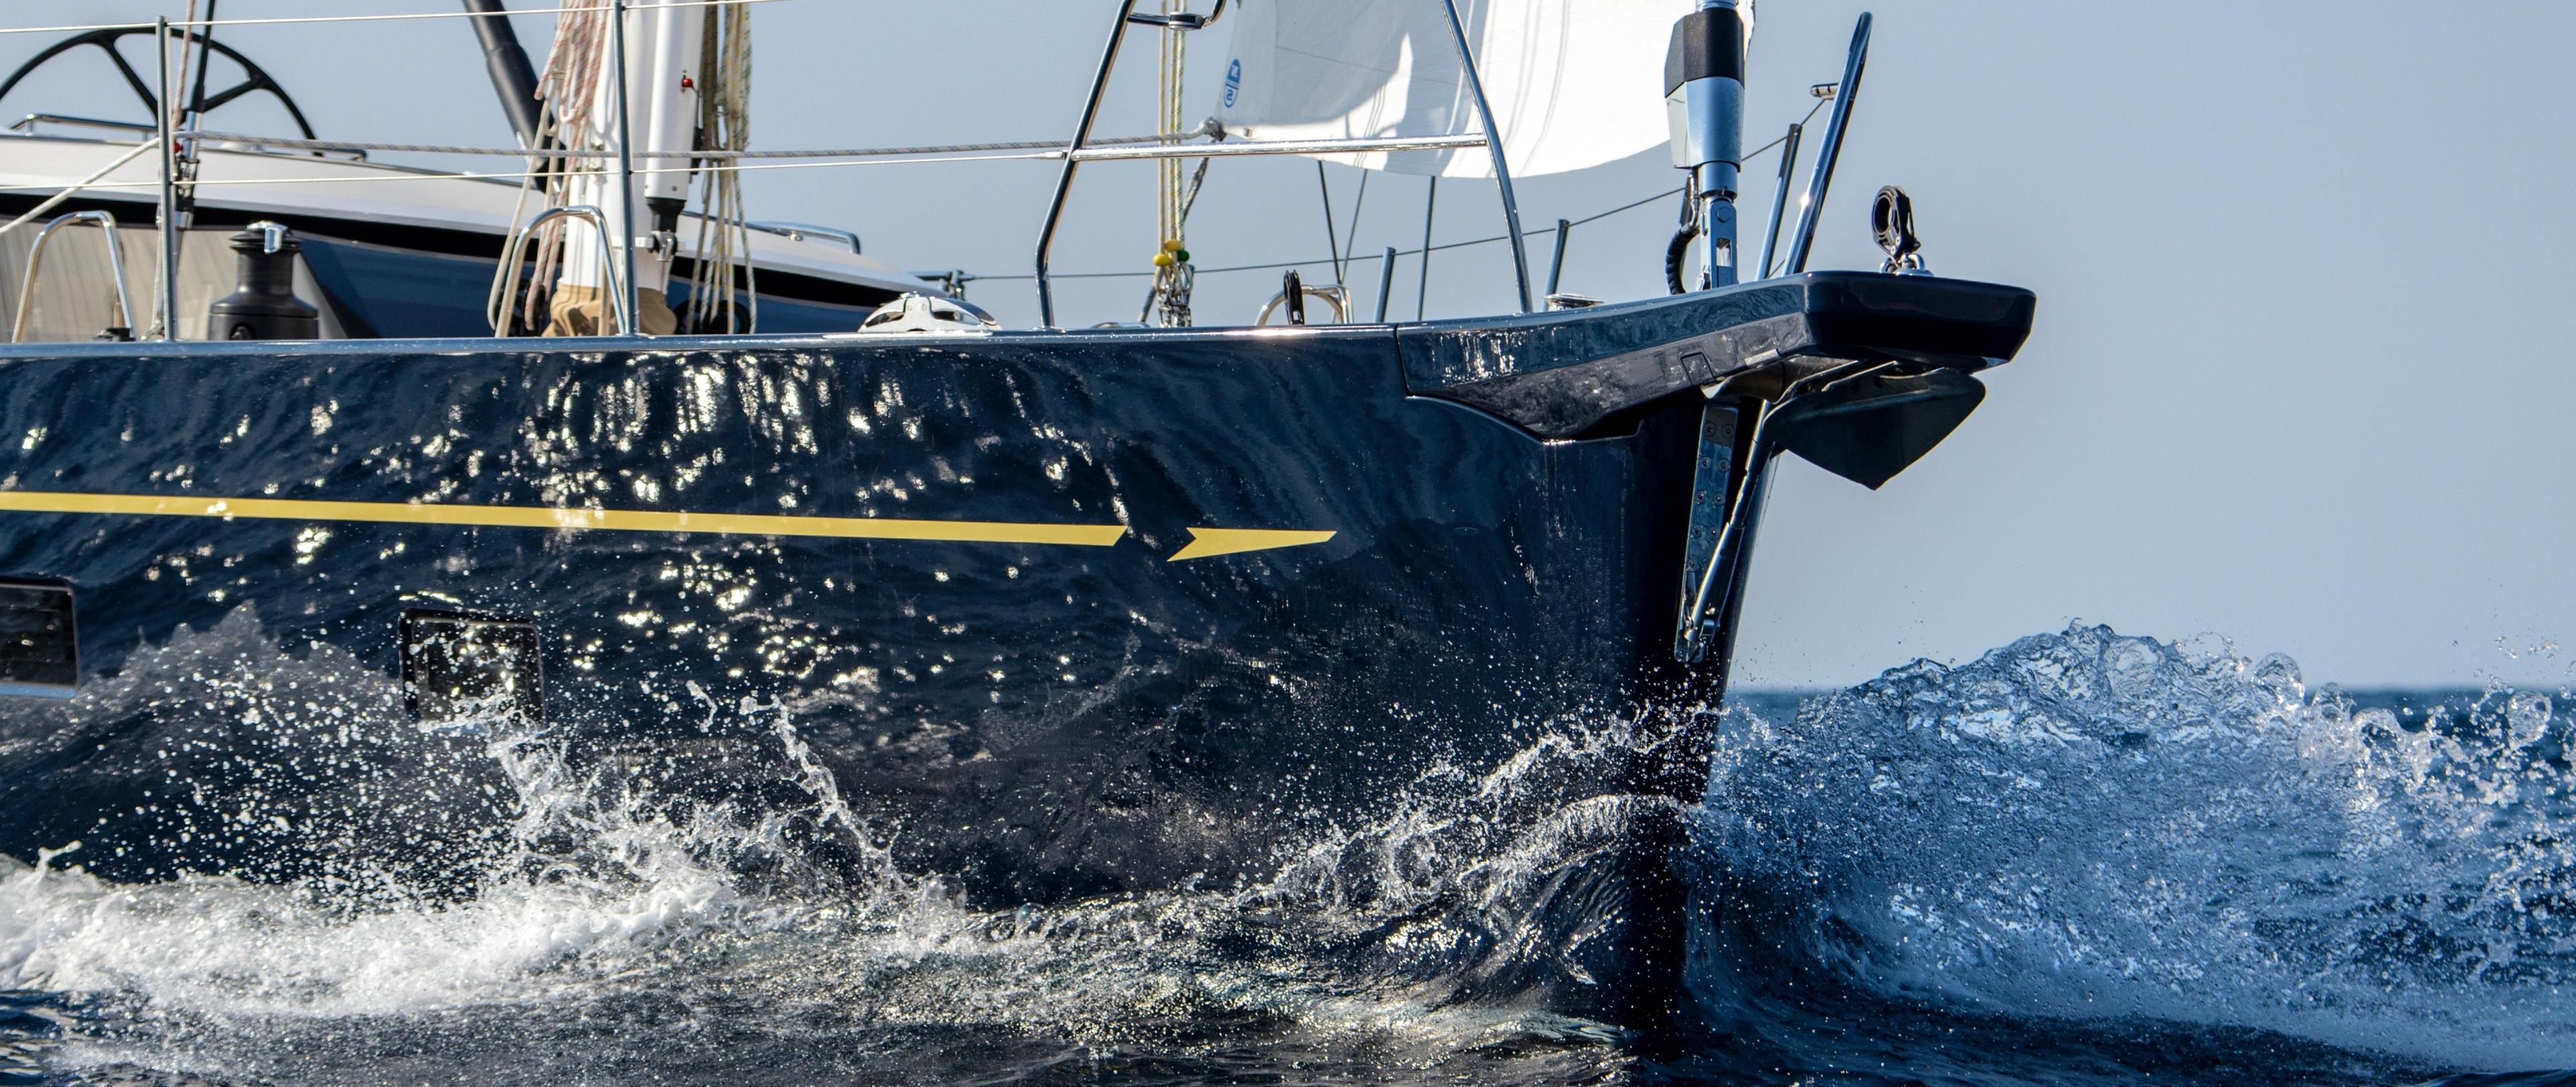 oyster yachts brokerage